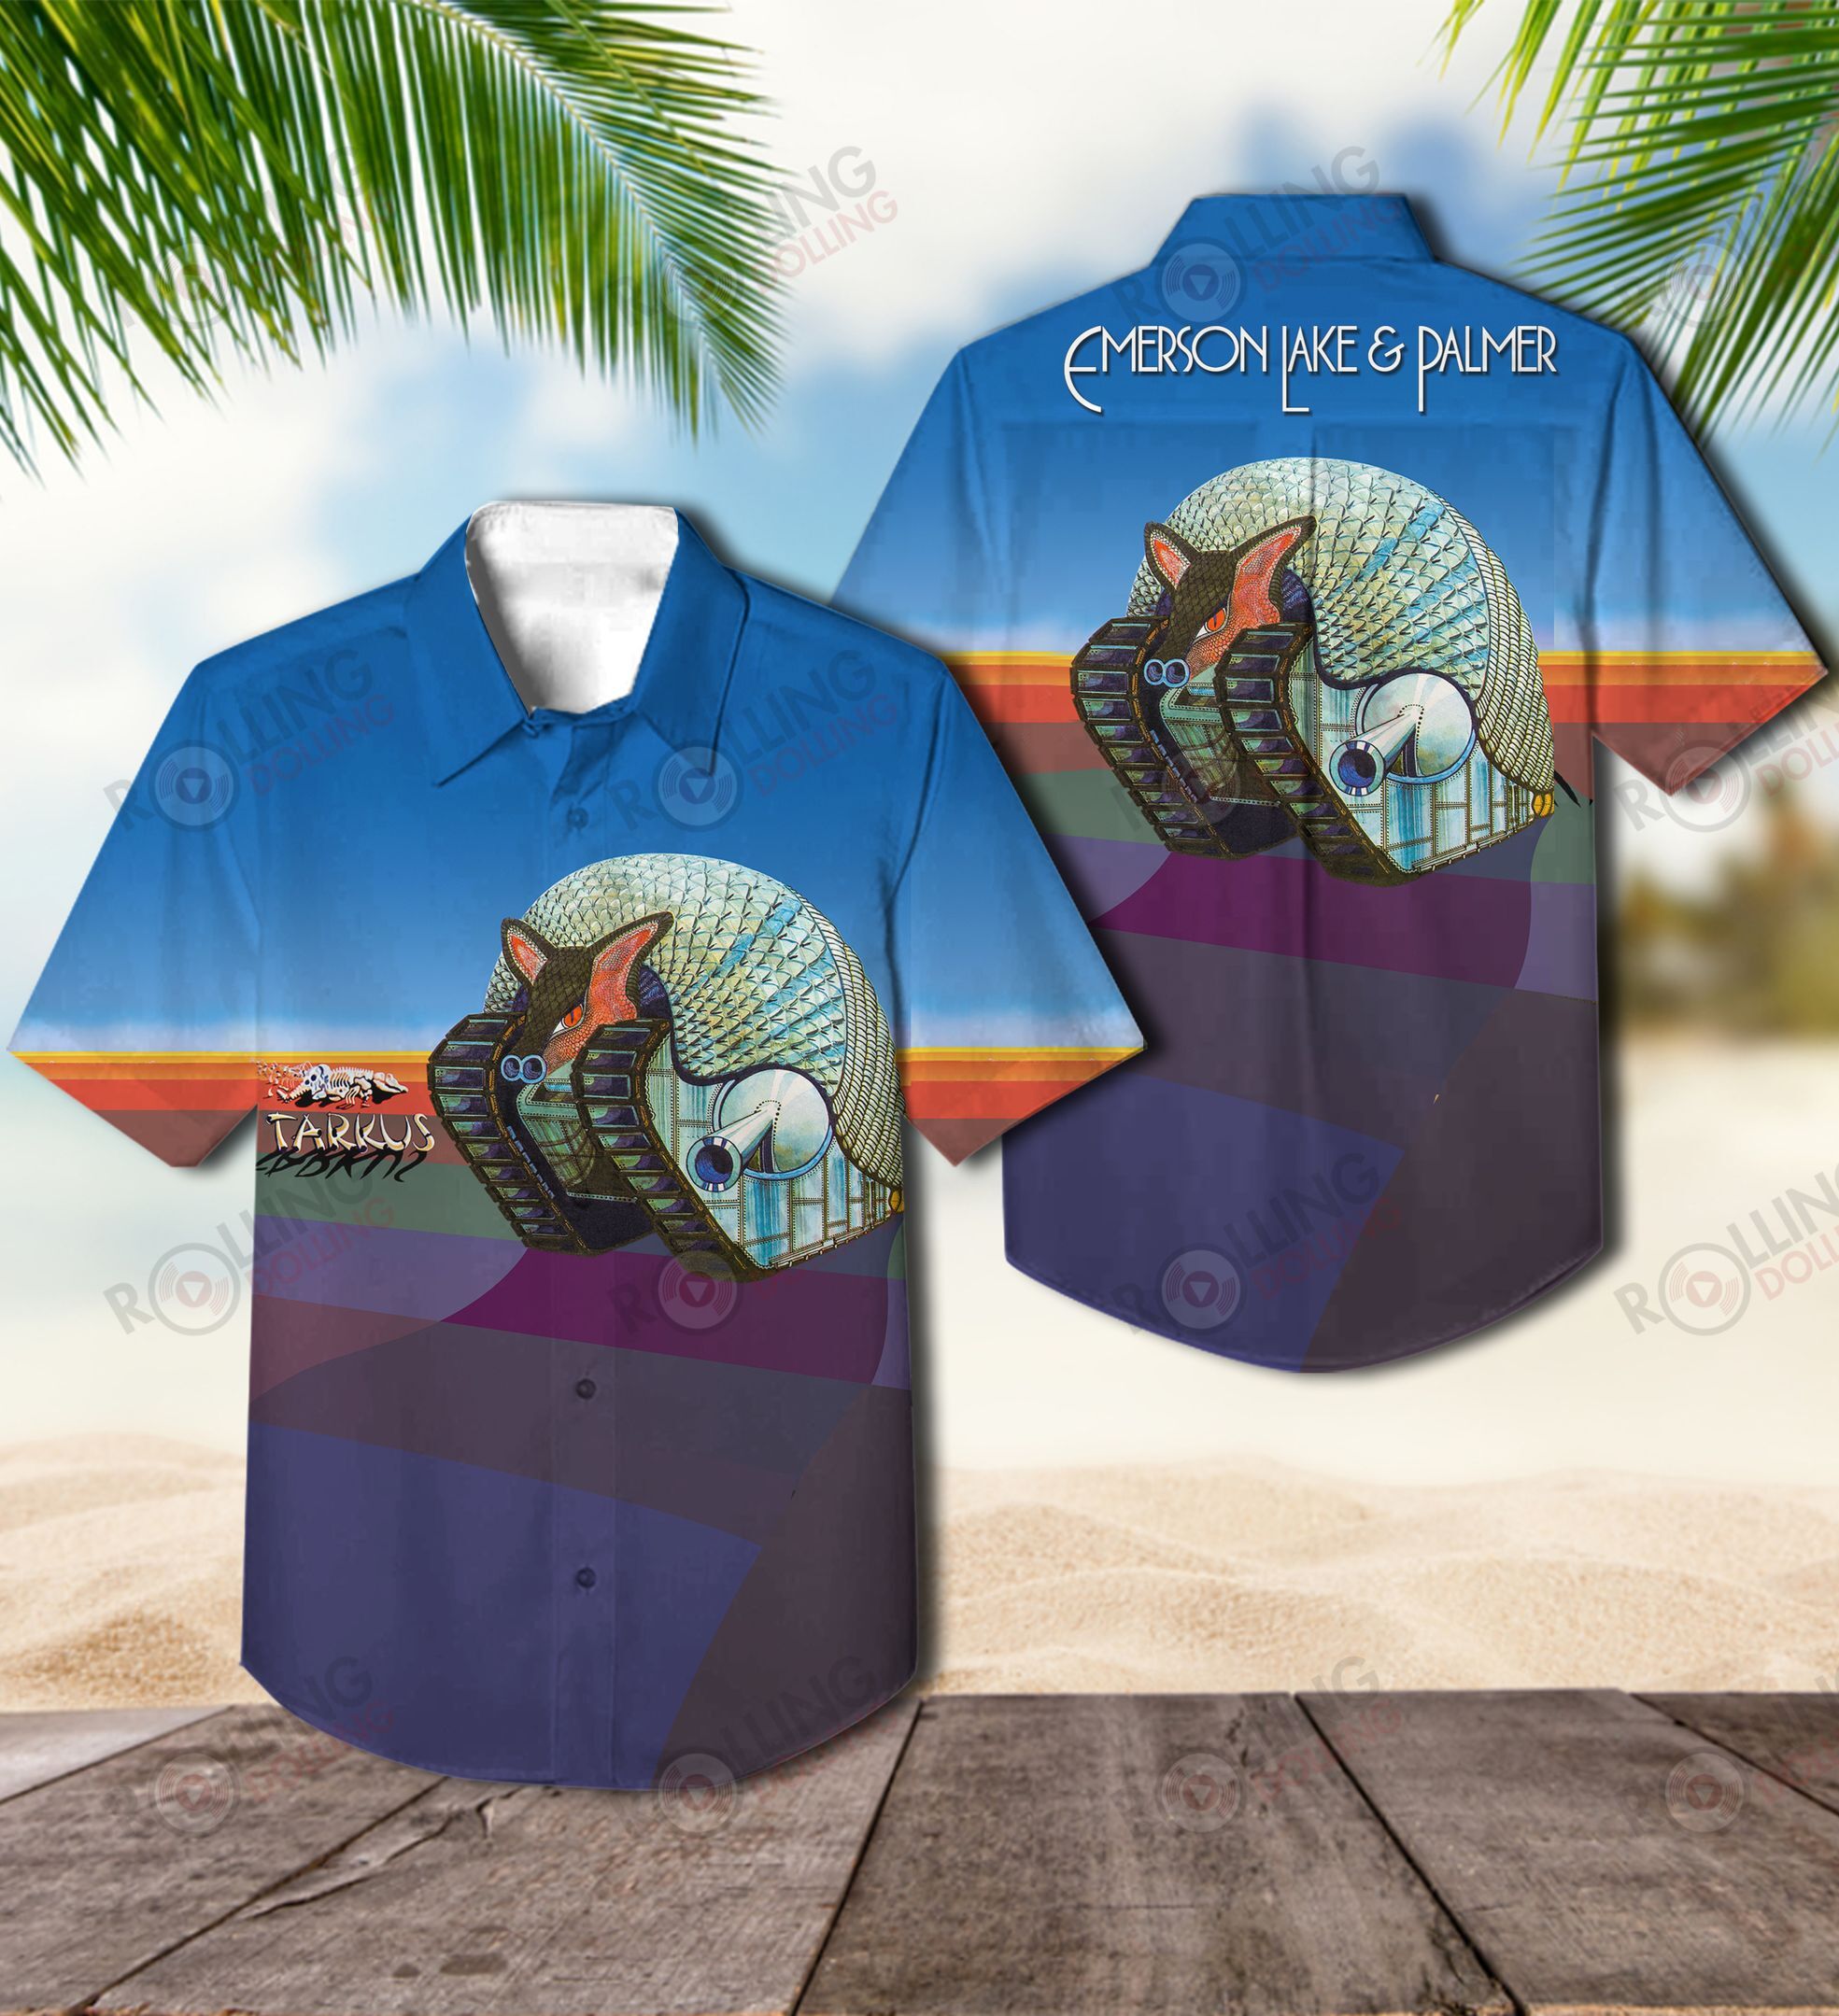 You'll have the perfect vacation outfit with this Hawaiian shirt 129